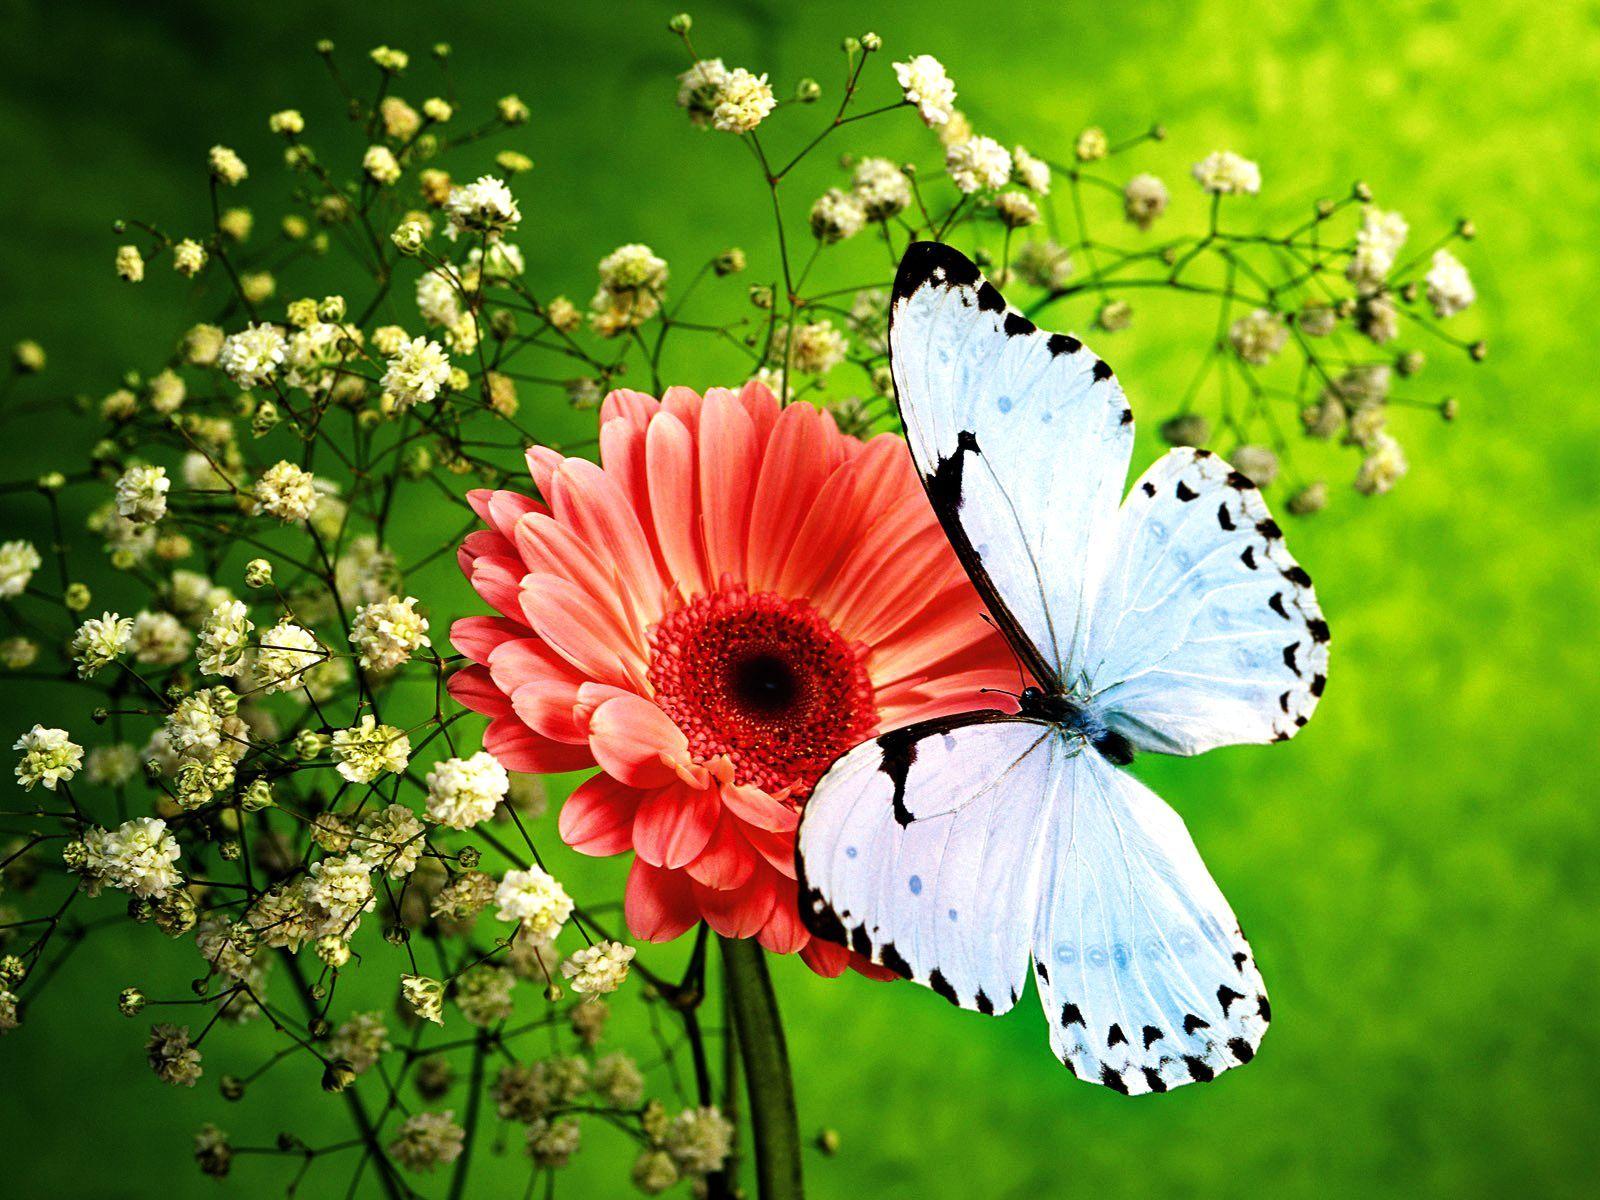 Flowers and Butterflies. Pink Flower and Beautiful Blue Butterfly